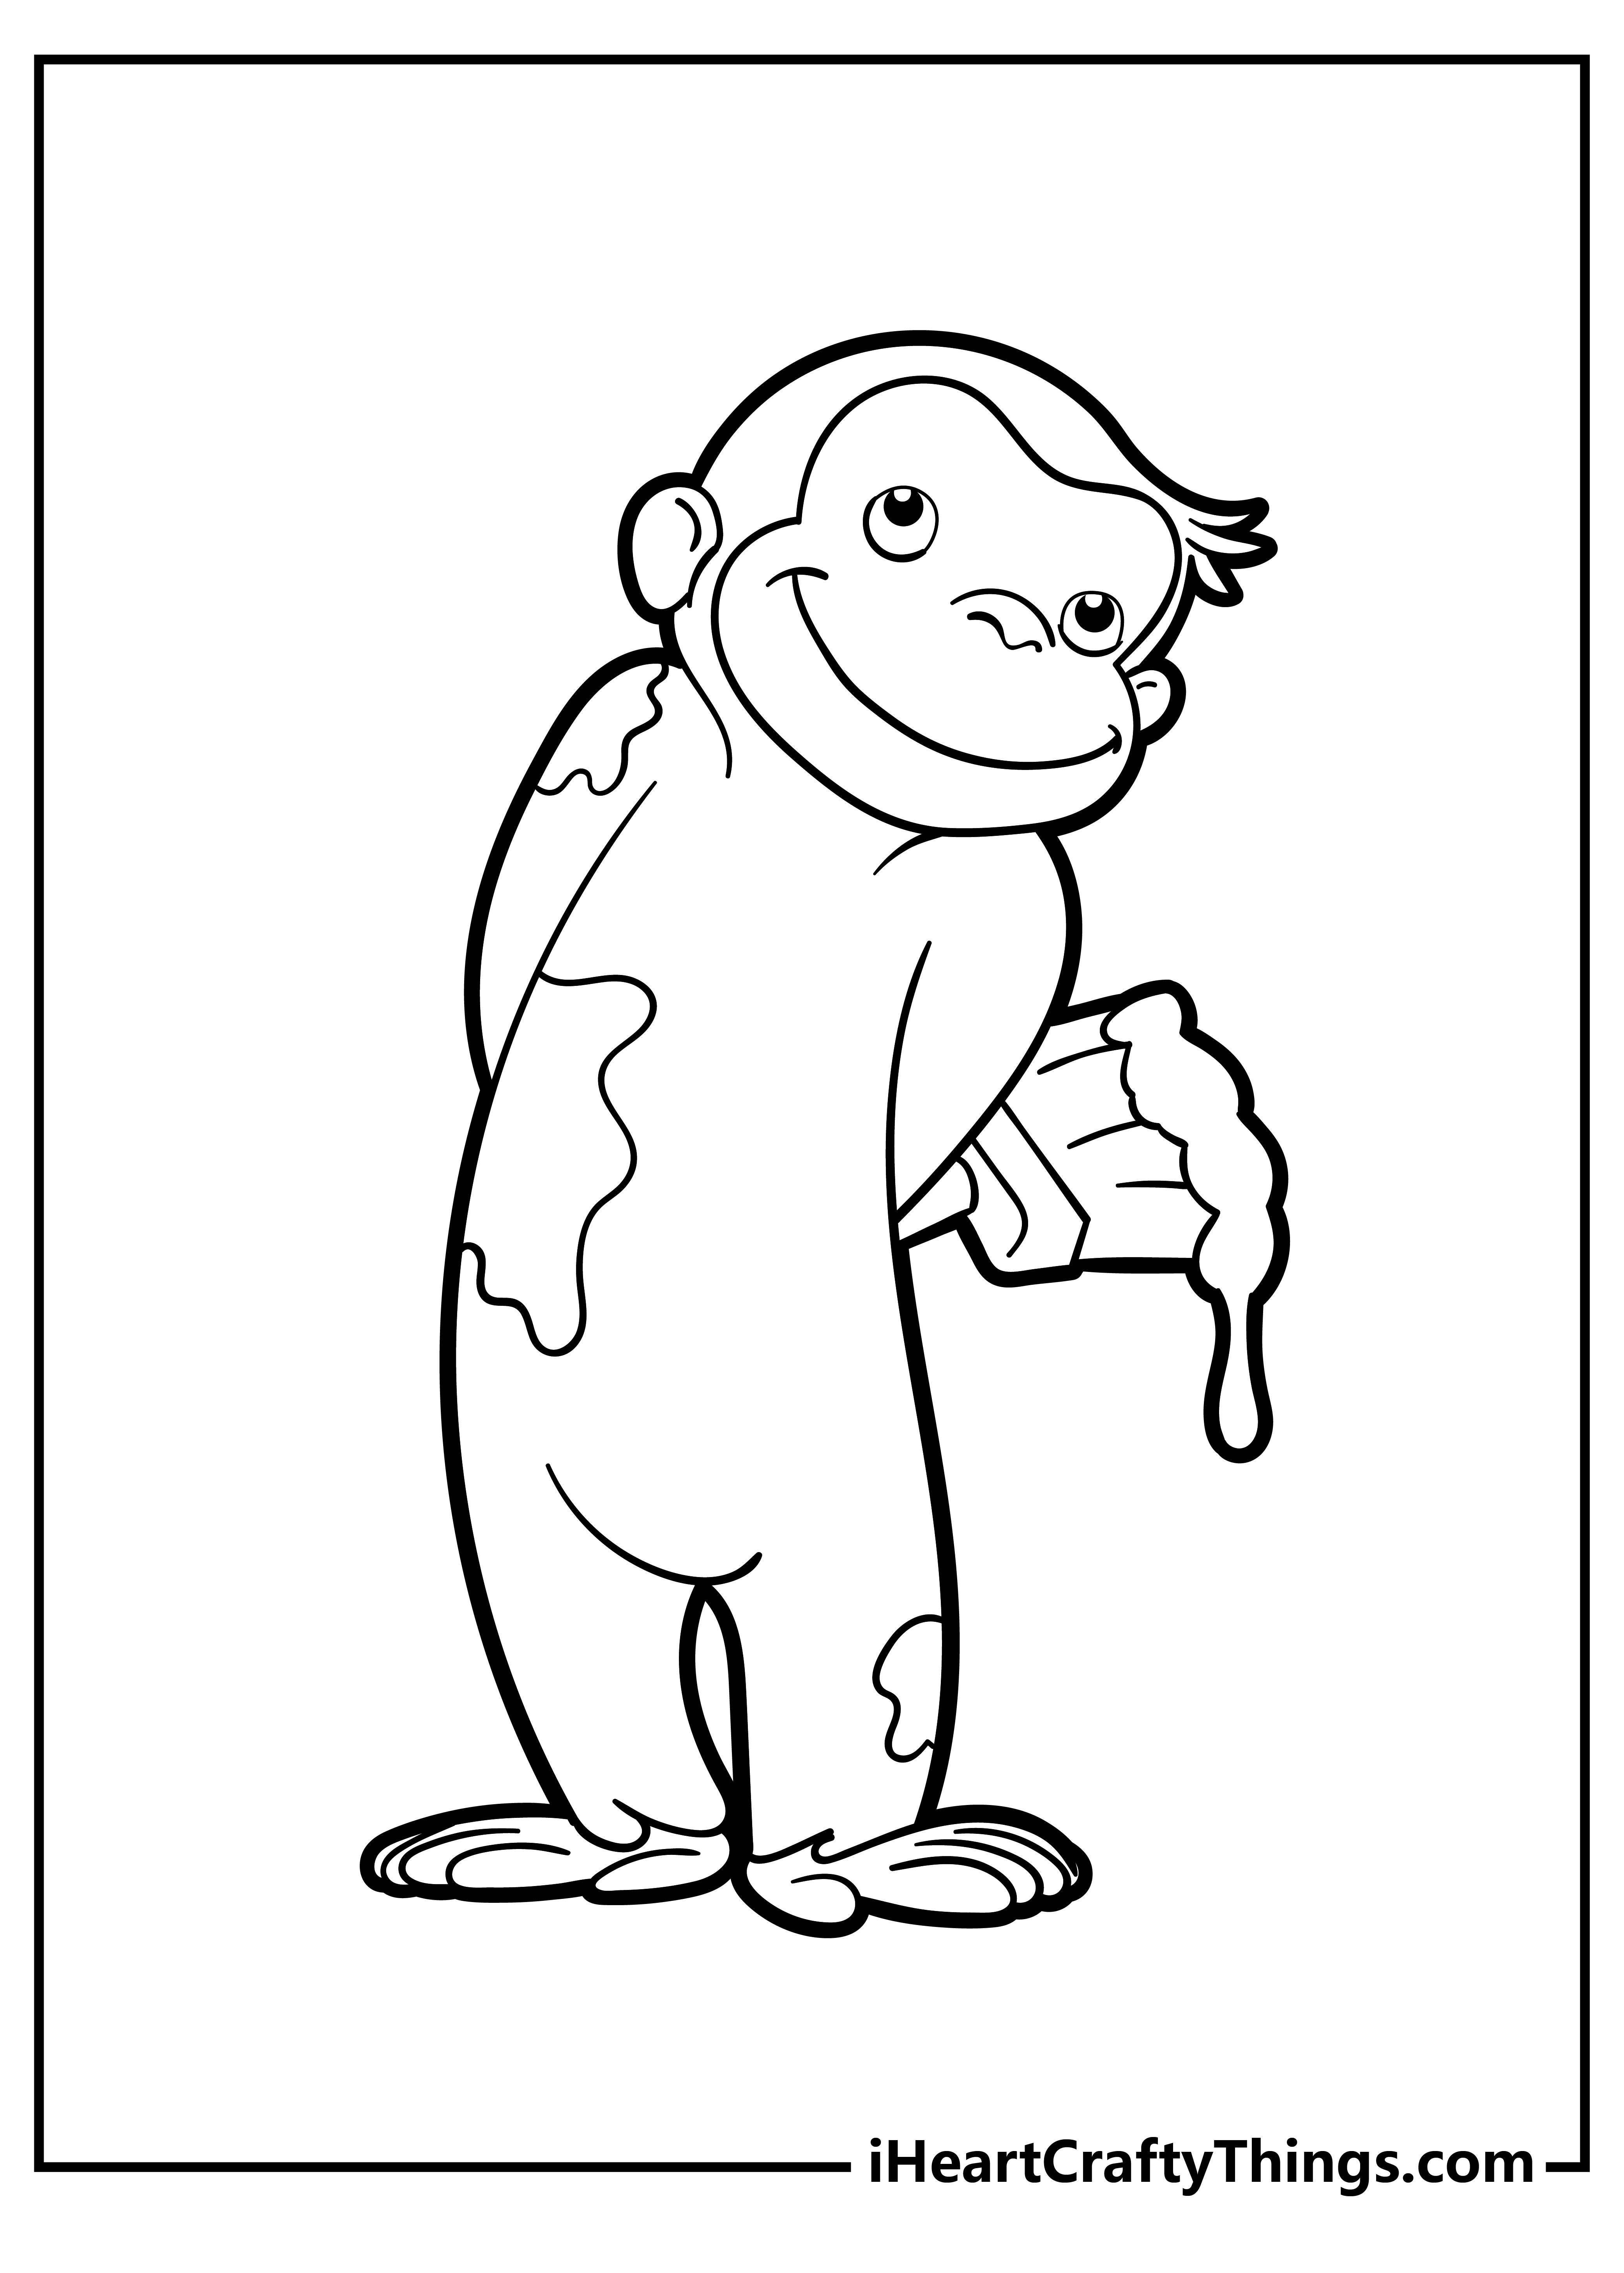 Curious george coloring pages free printables